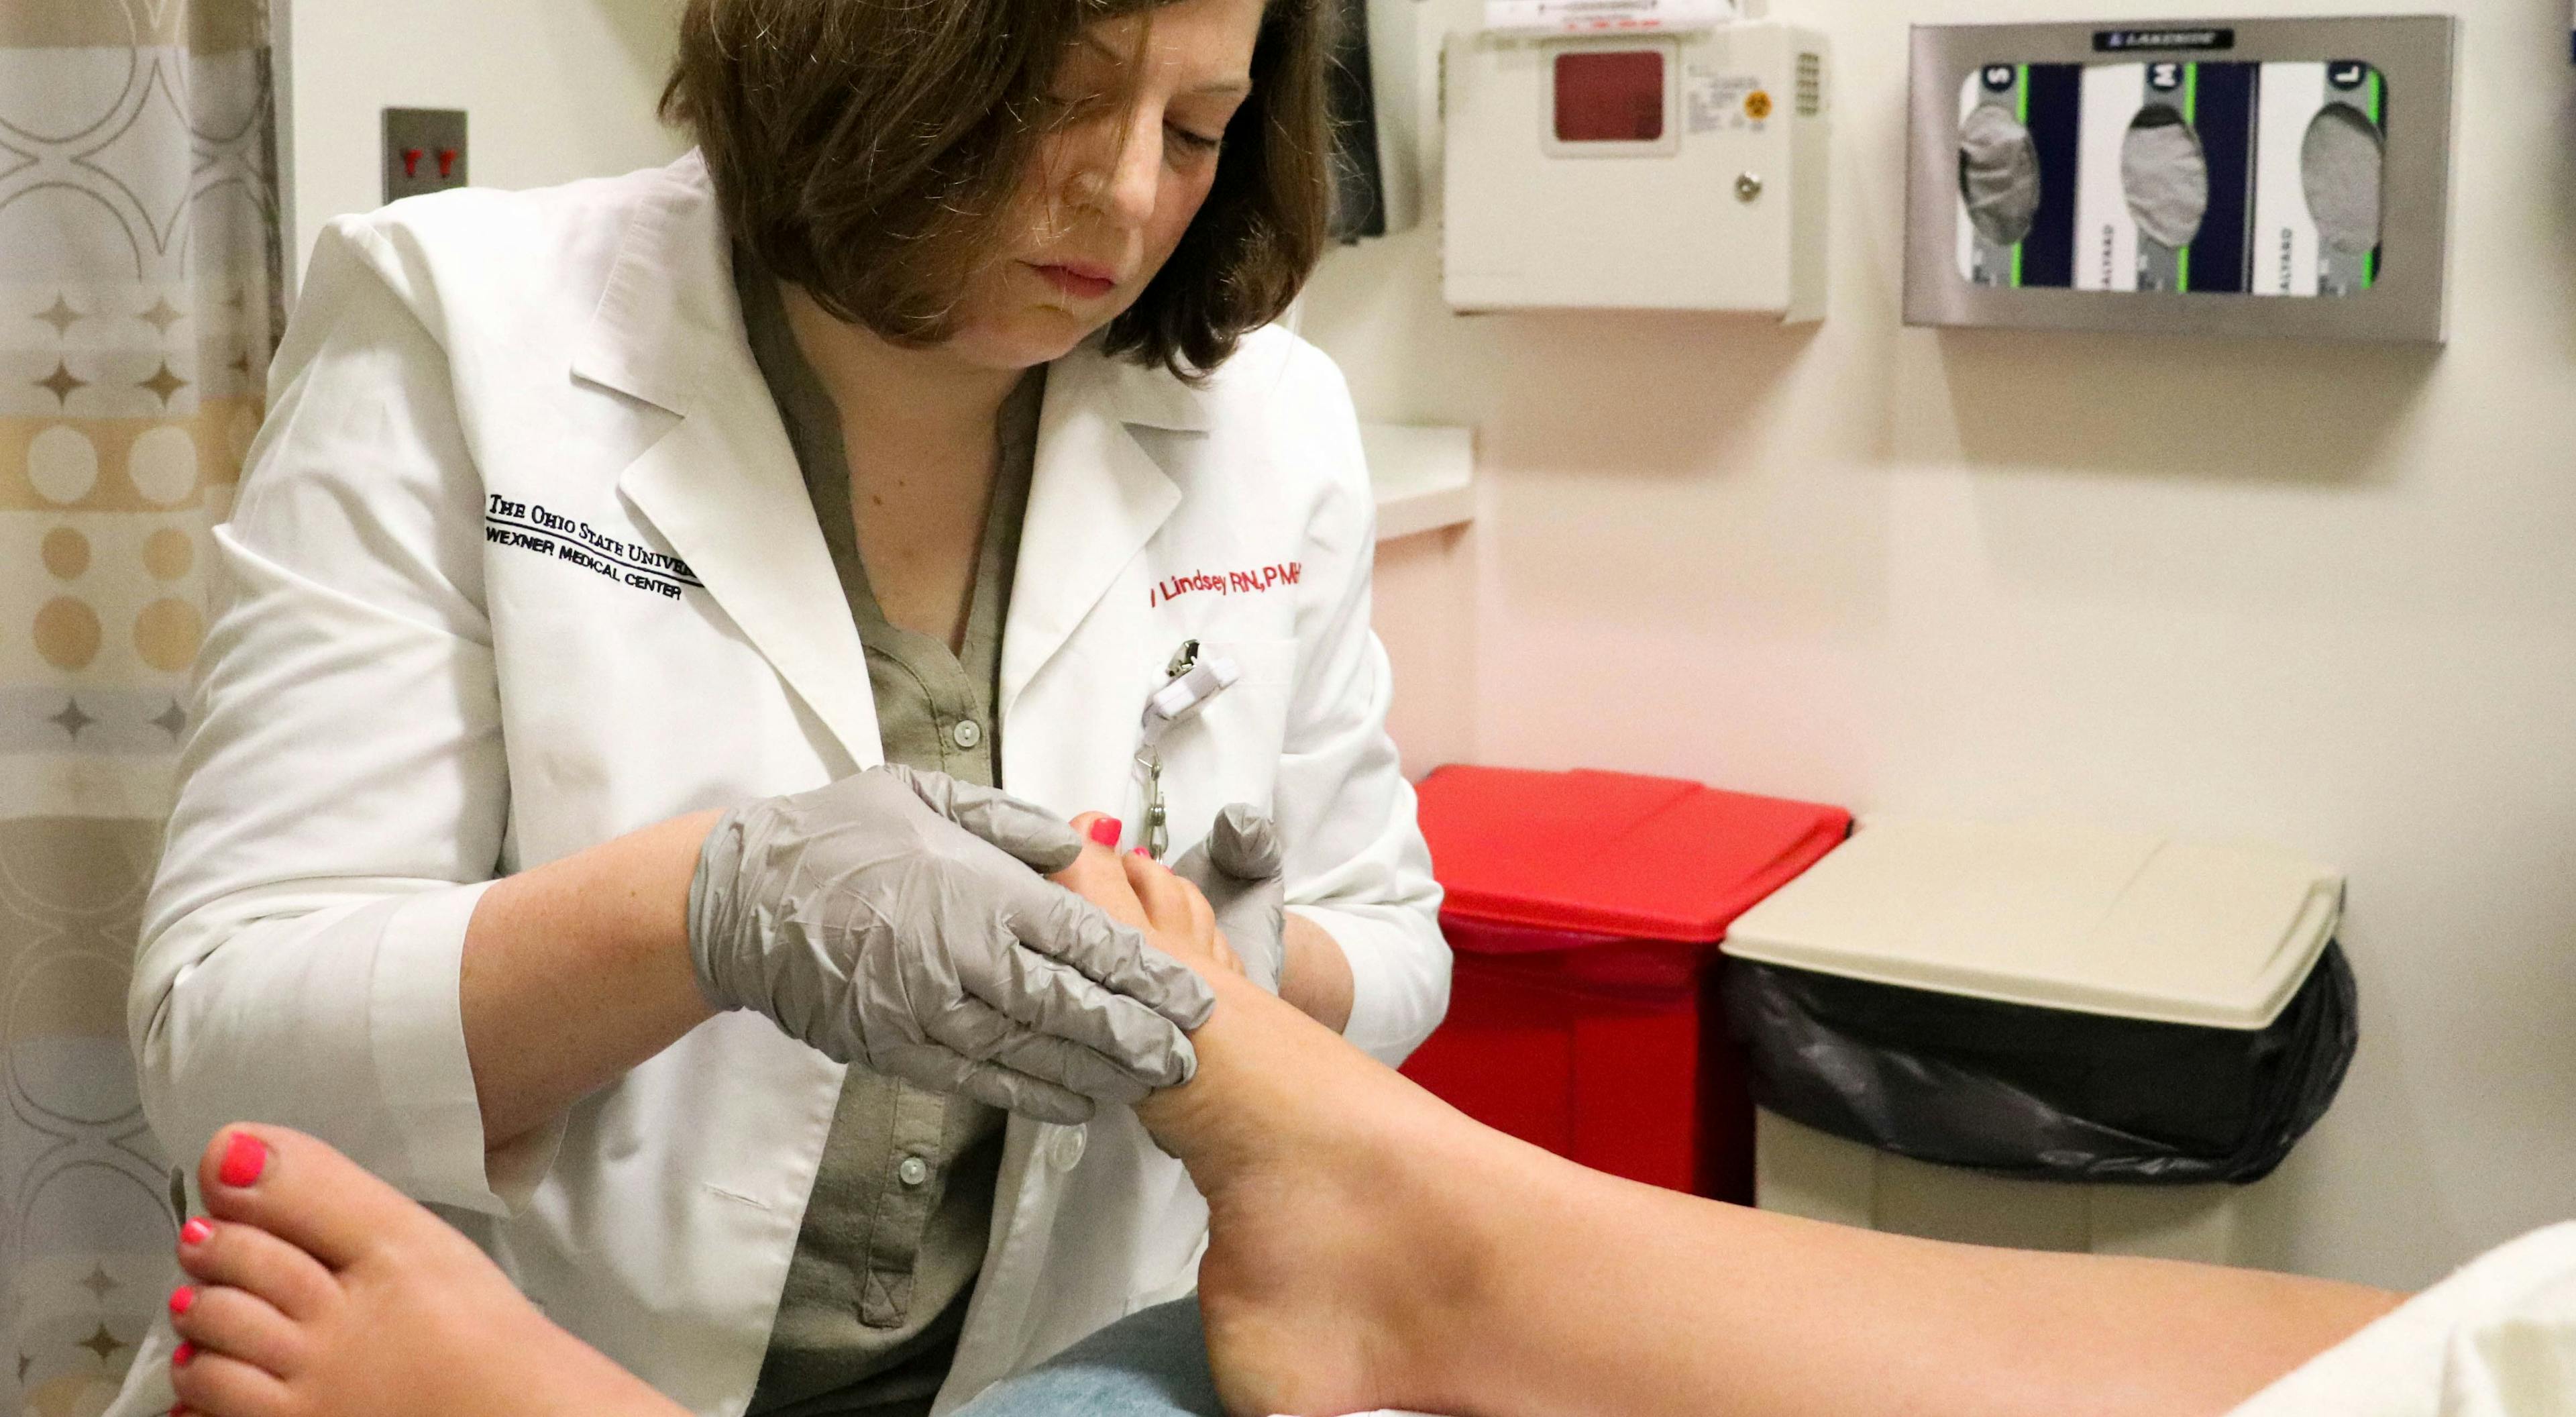 Amy Lindsey performs foot reflexology on a patient with cervical cancer. A new study at The Ohio State University Comprehensive Cancer Center - Arthur G. James Cancer Hospital and Richard J. Solove Research Institute found that, along with aromatherapy, reflexology reduced patients' use of pain medications by 40 percent during brachytherapy sessions.